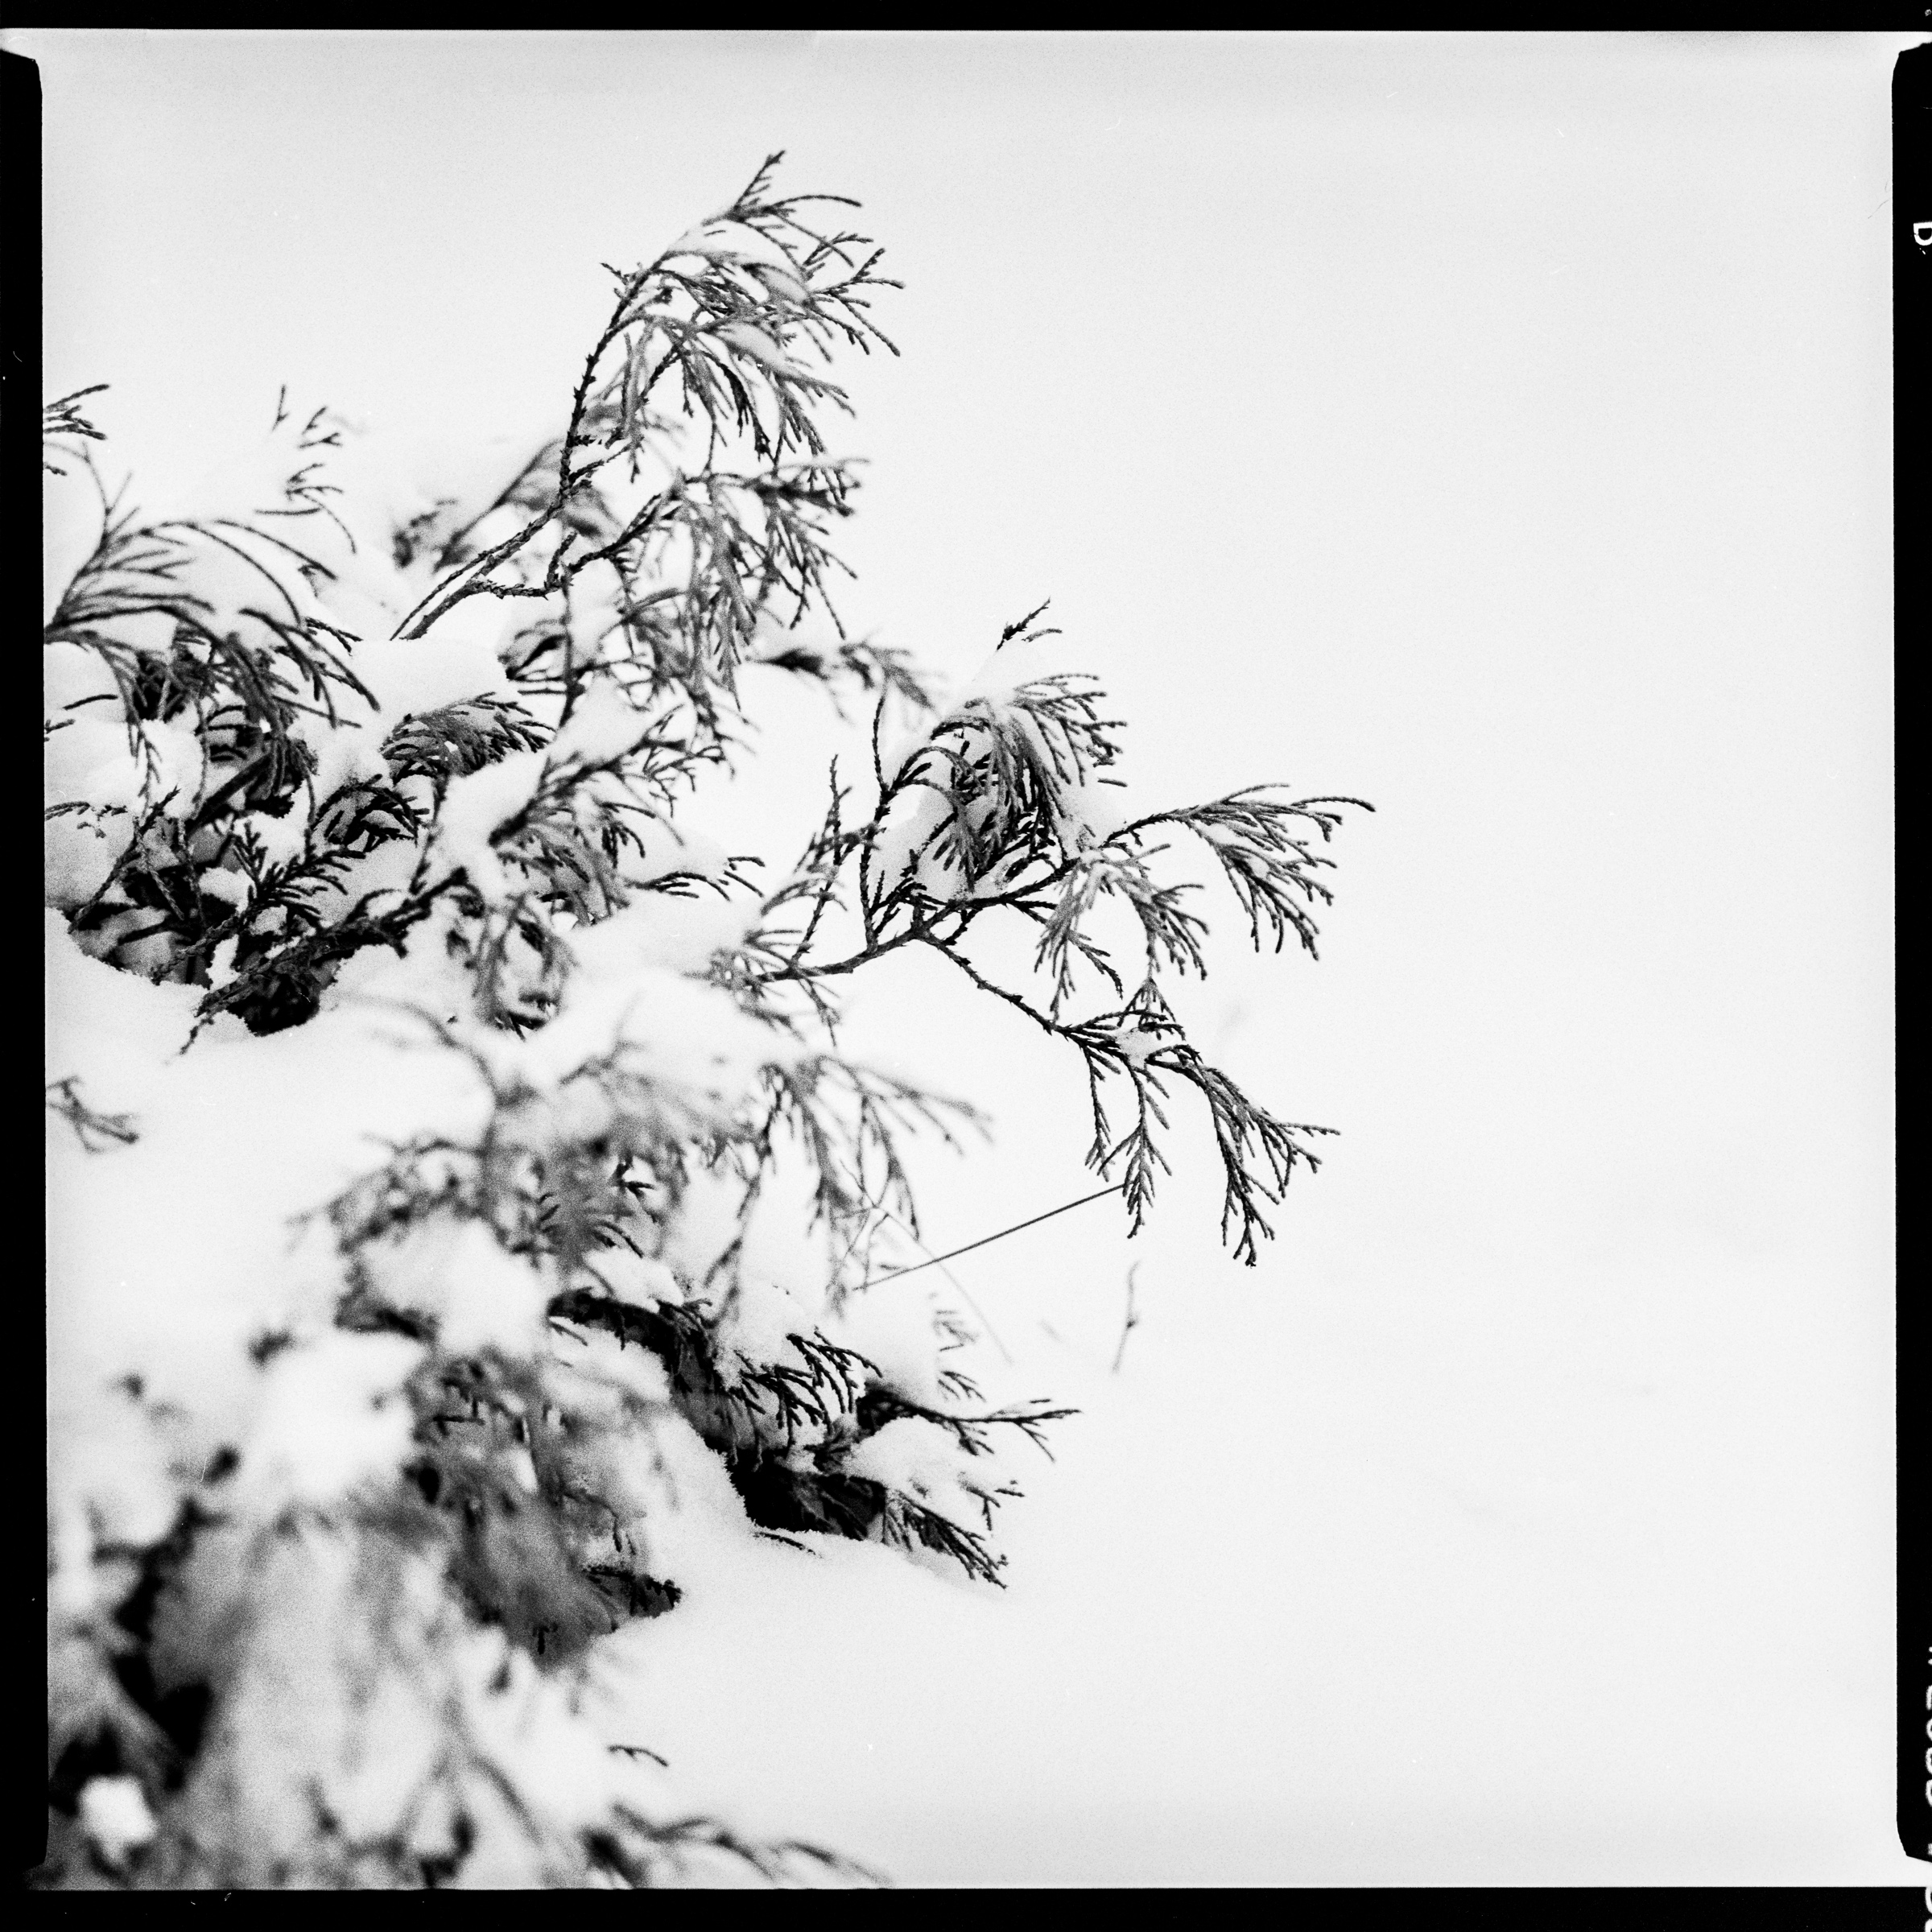 Black and white photo of juniper twigs against a snowy background